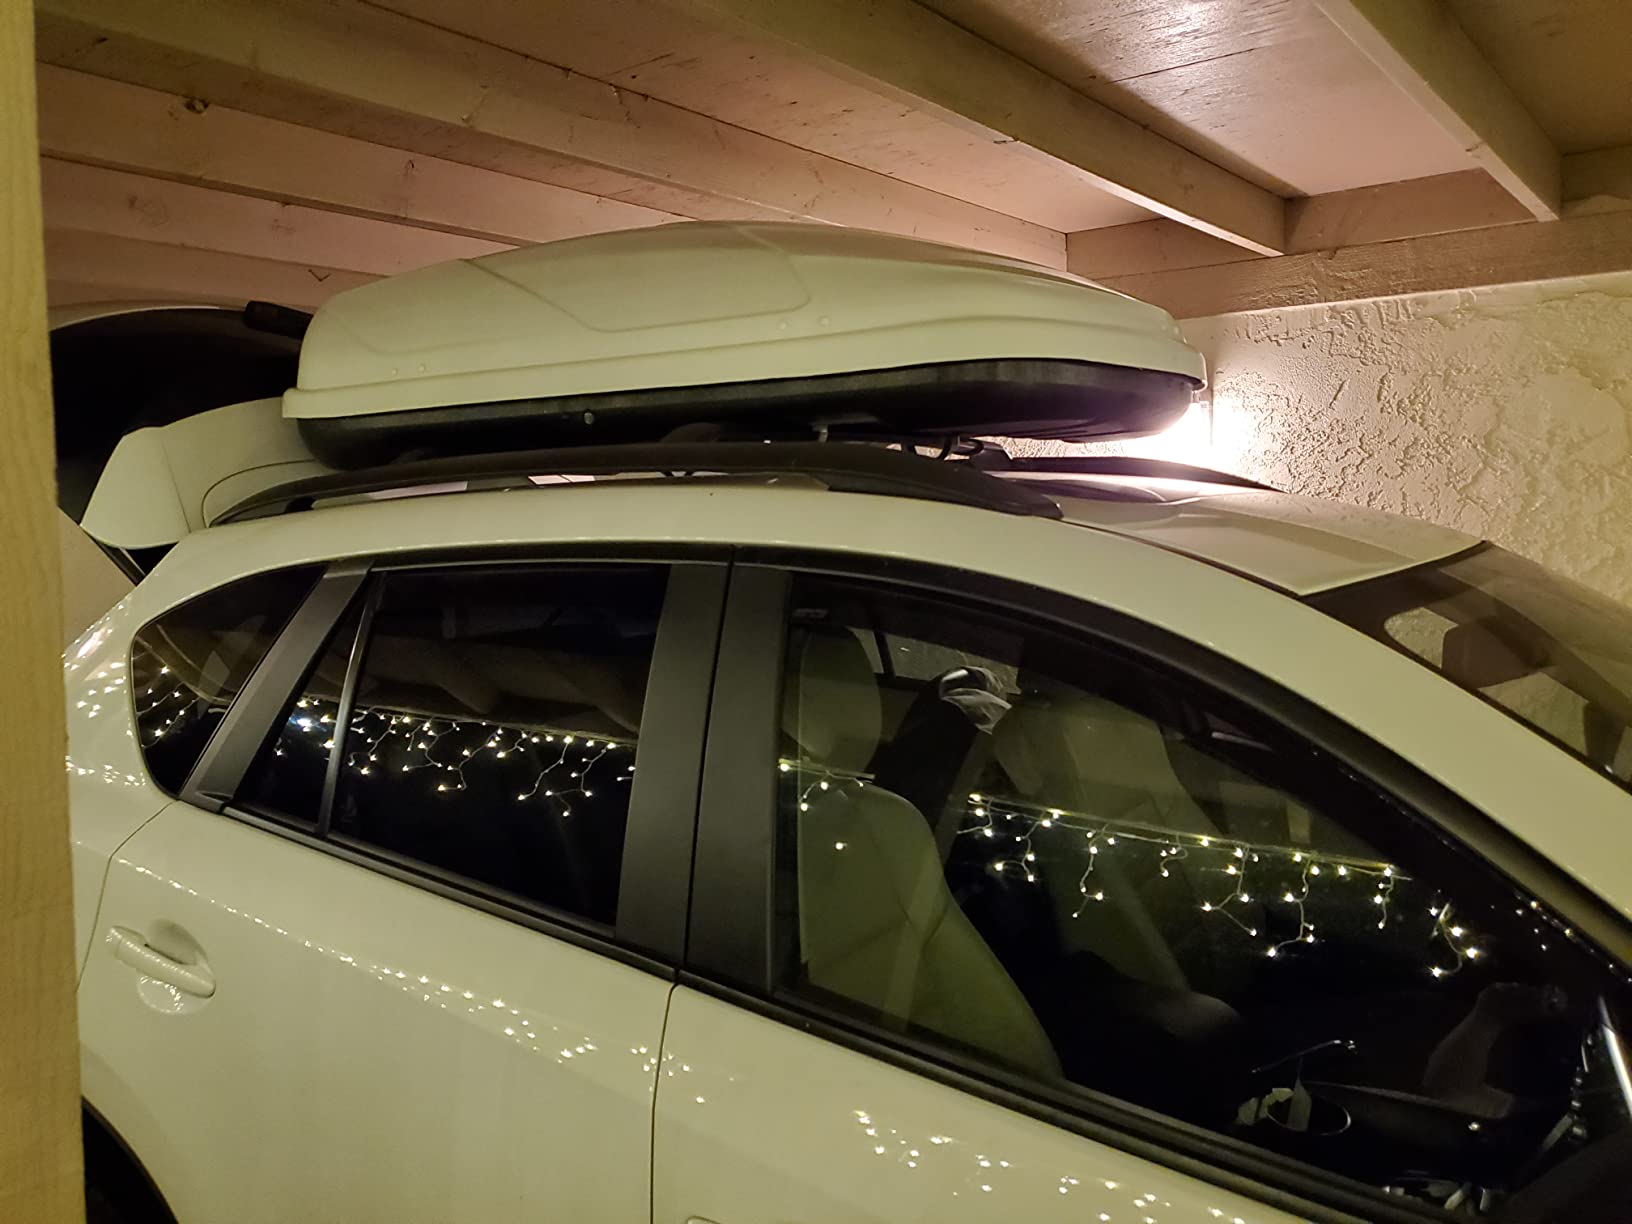 GoPlus: The Little Cargo Box That Could.